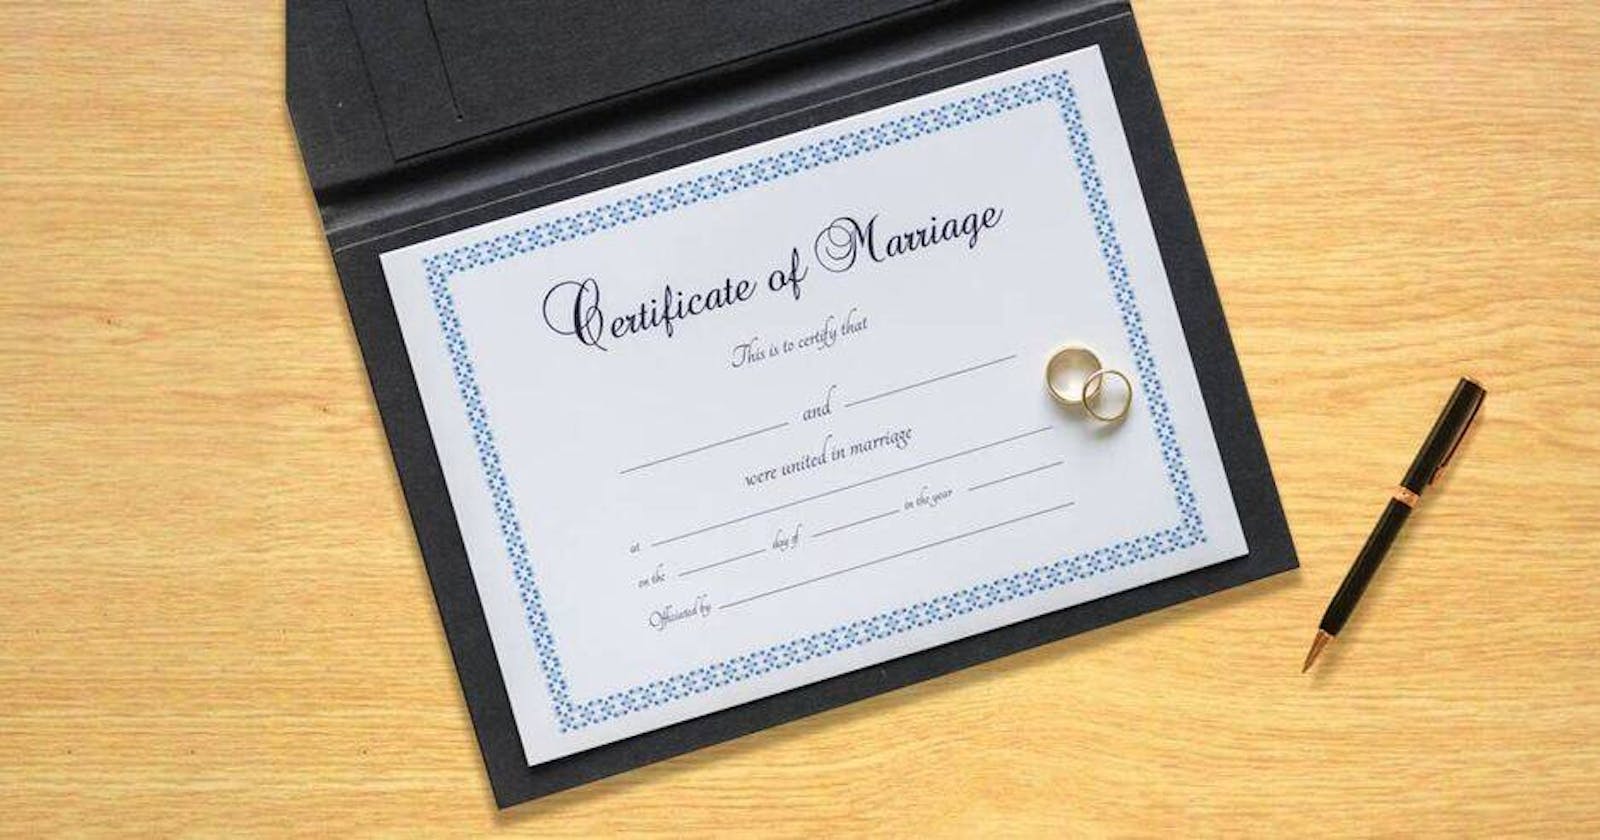 Marriage Certificate Attestation Process in Saudi Arabia: A Detailed Overview